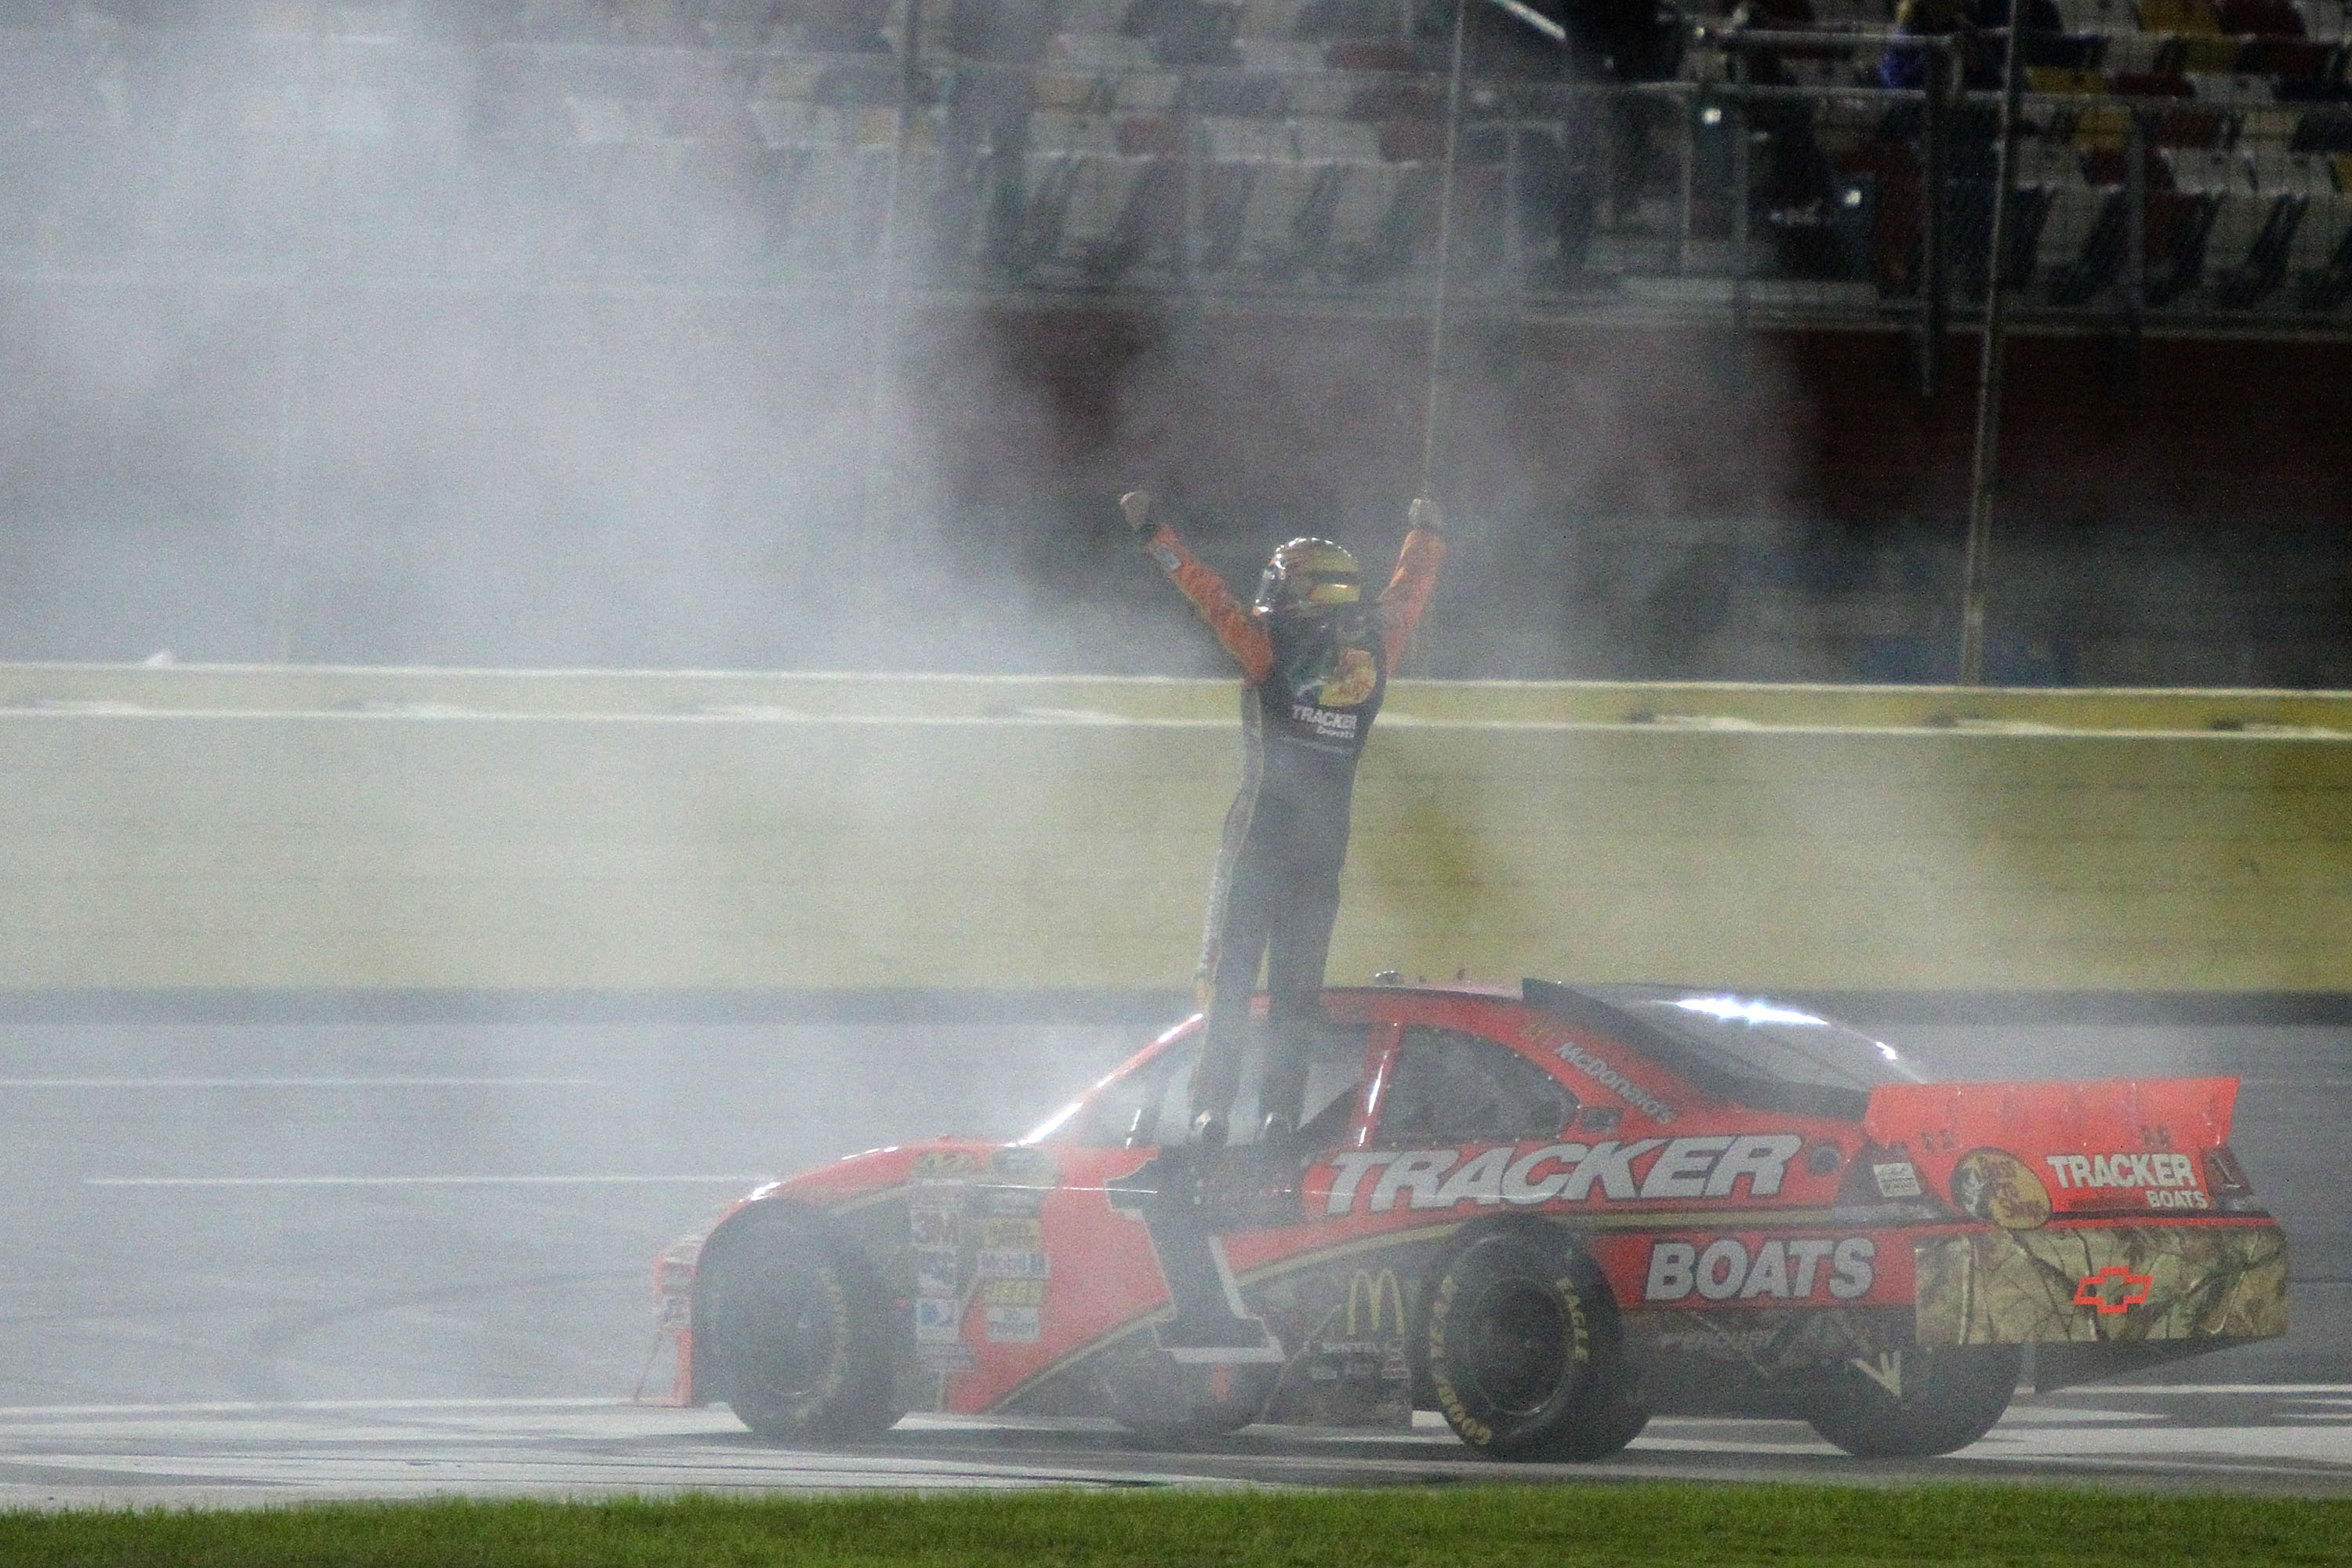 CONCORD, NC - OCTOBER 16:  Jamie McMurray, driver of the #1 Bass Pro Shops/Tracker Boats Chevrolet, celebrates on track after winning the NASCAR Sprint Cup Series Bank of America 500 at Charlotte Motor Speedway on October 16, 2010 in Concord, North Caroli